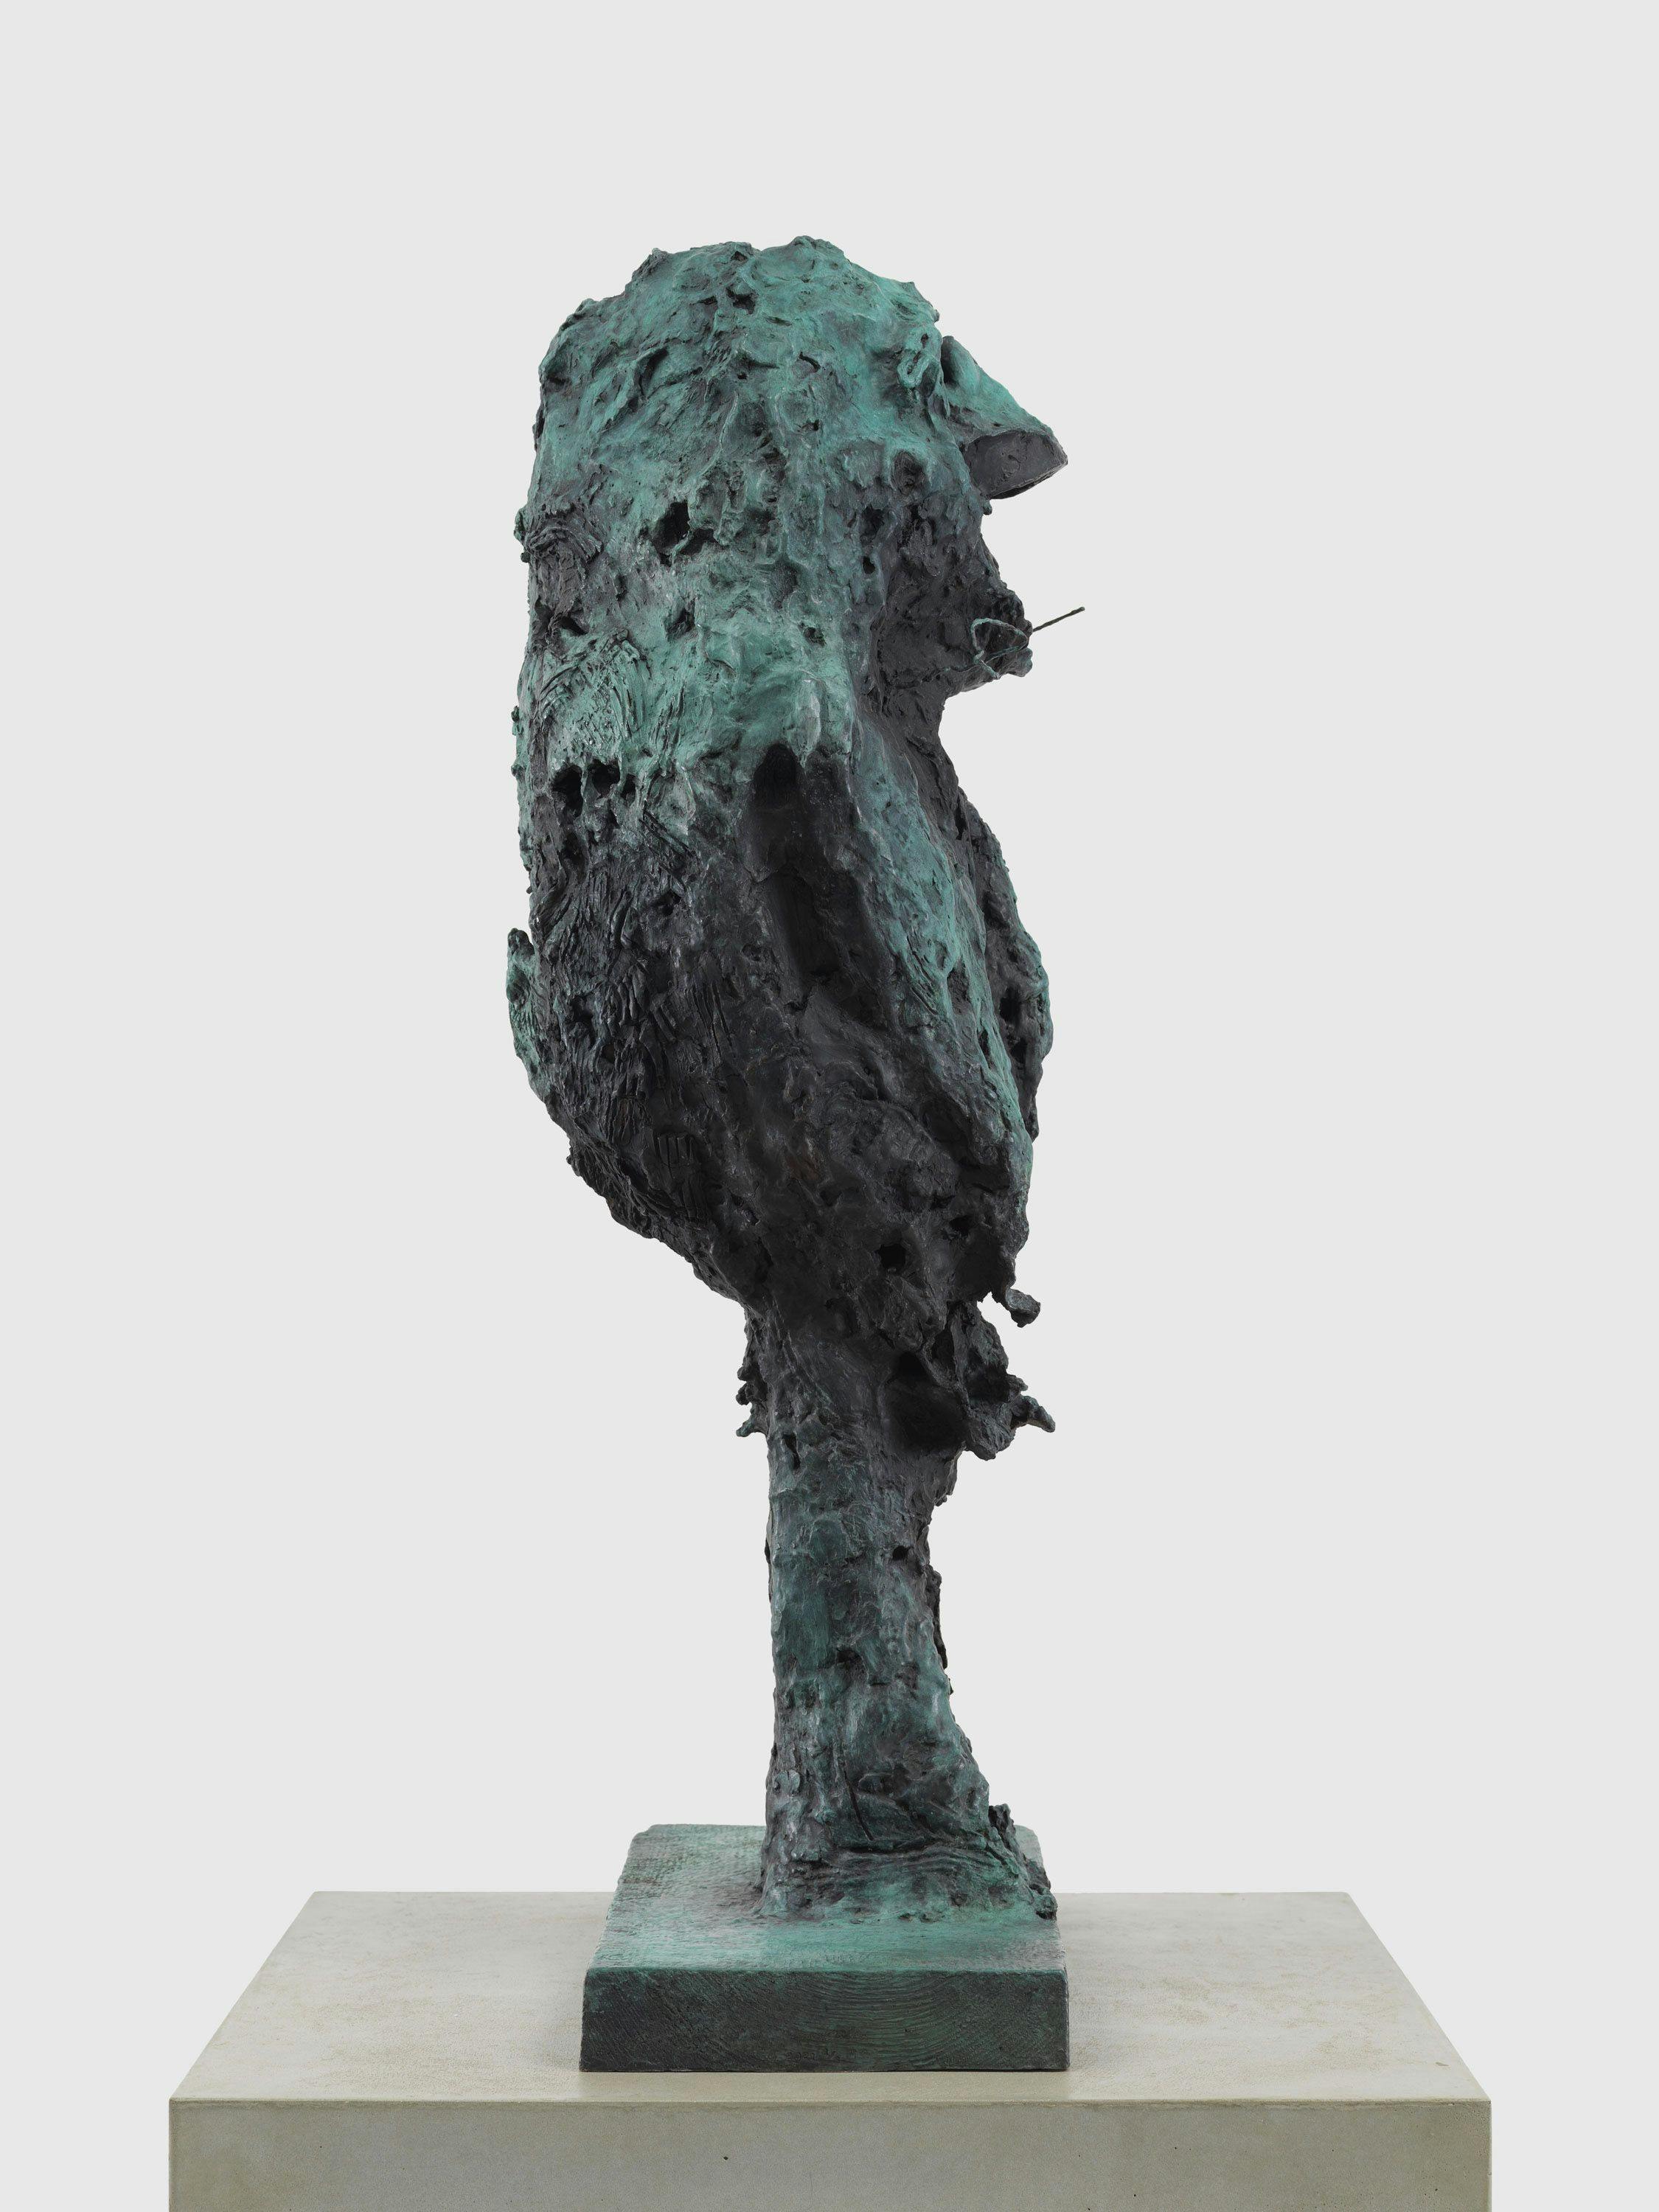 A detail from a patinated bronze artwork by Huma Bhabha, titled The Ancient and Arcane, dated 2021.